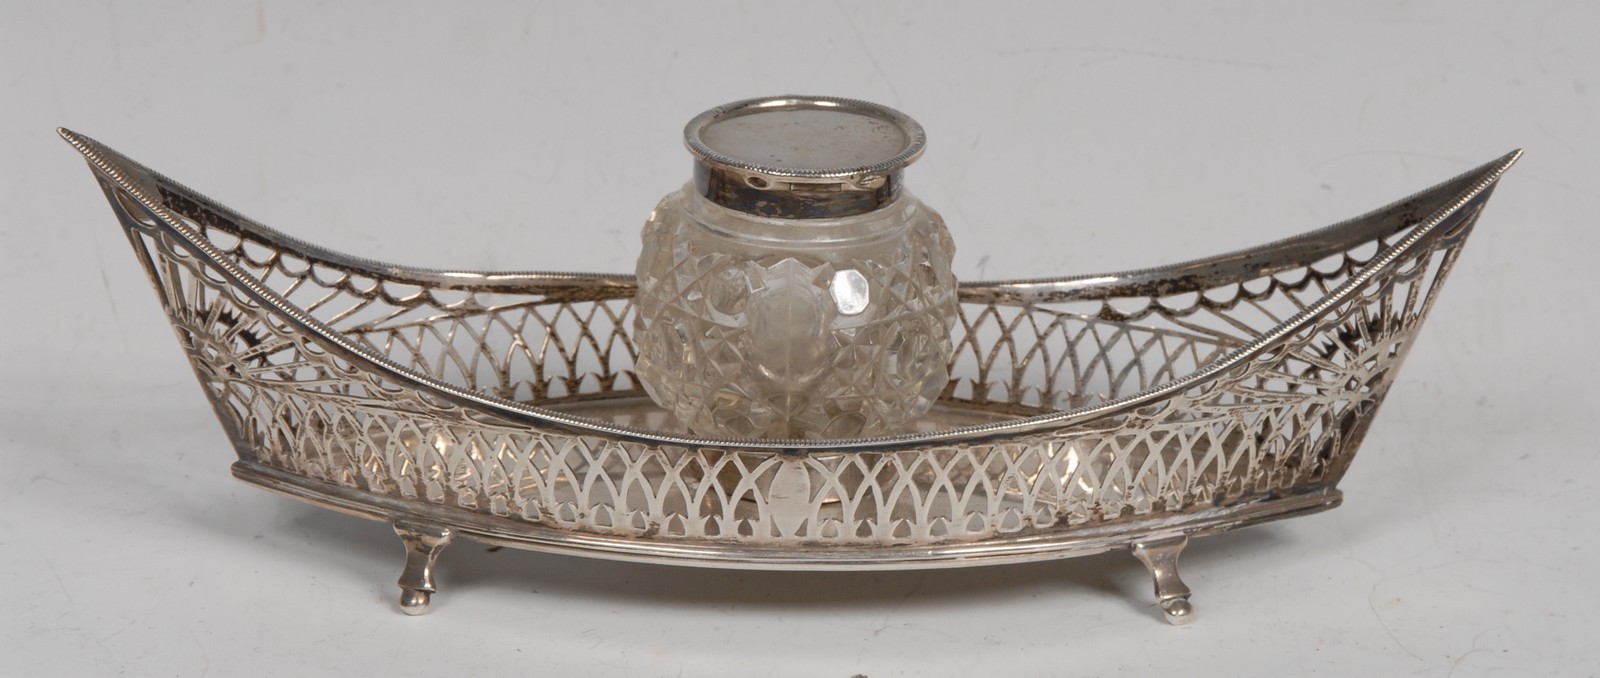 An Edwardian silver navette shaped inkstand, hobnail-cut clear glass well with hinged cover,